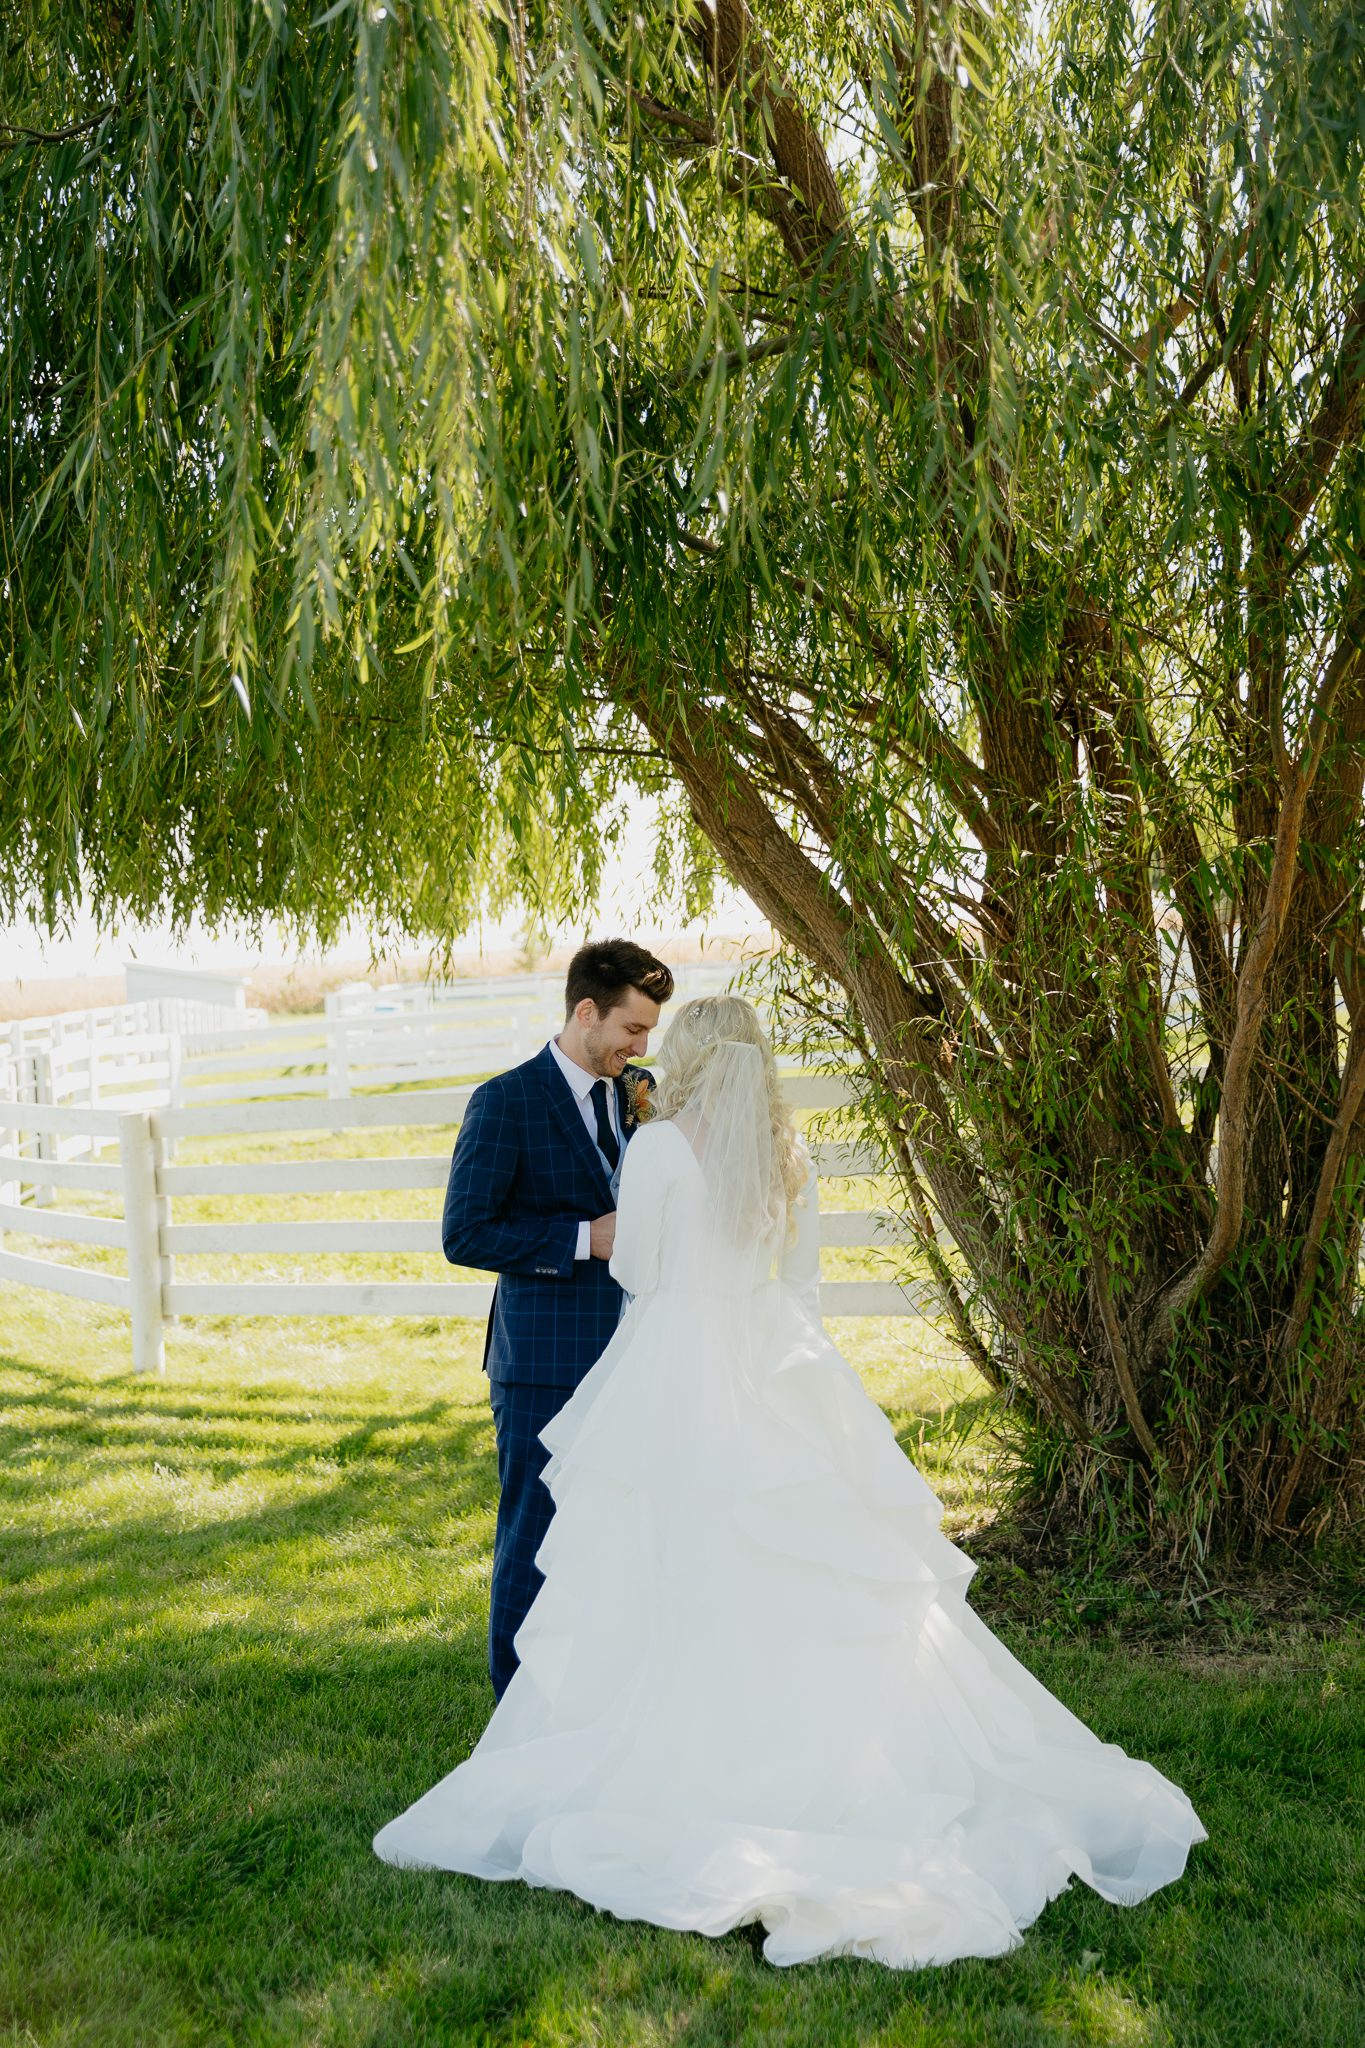 groom and bride read vows to each other underneath a willow tree